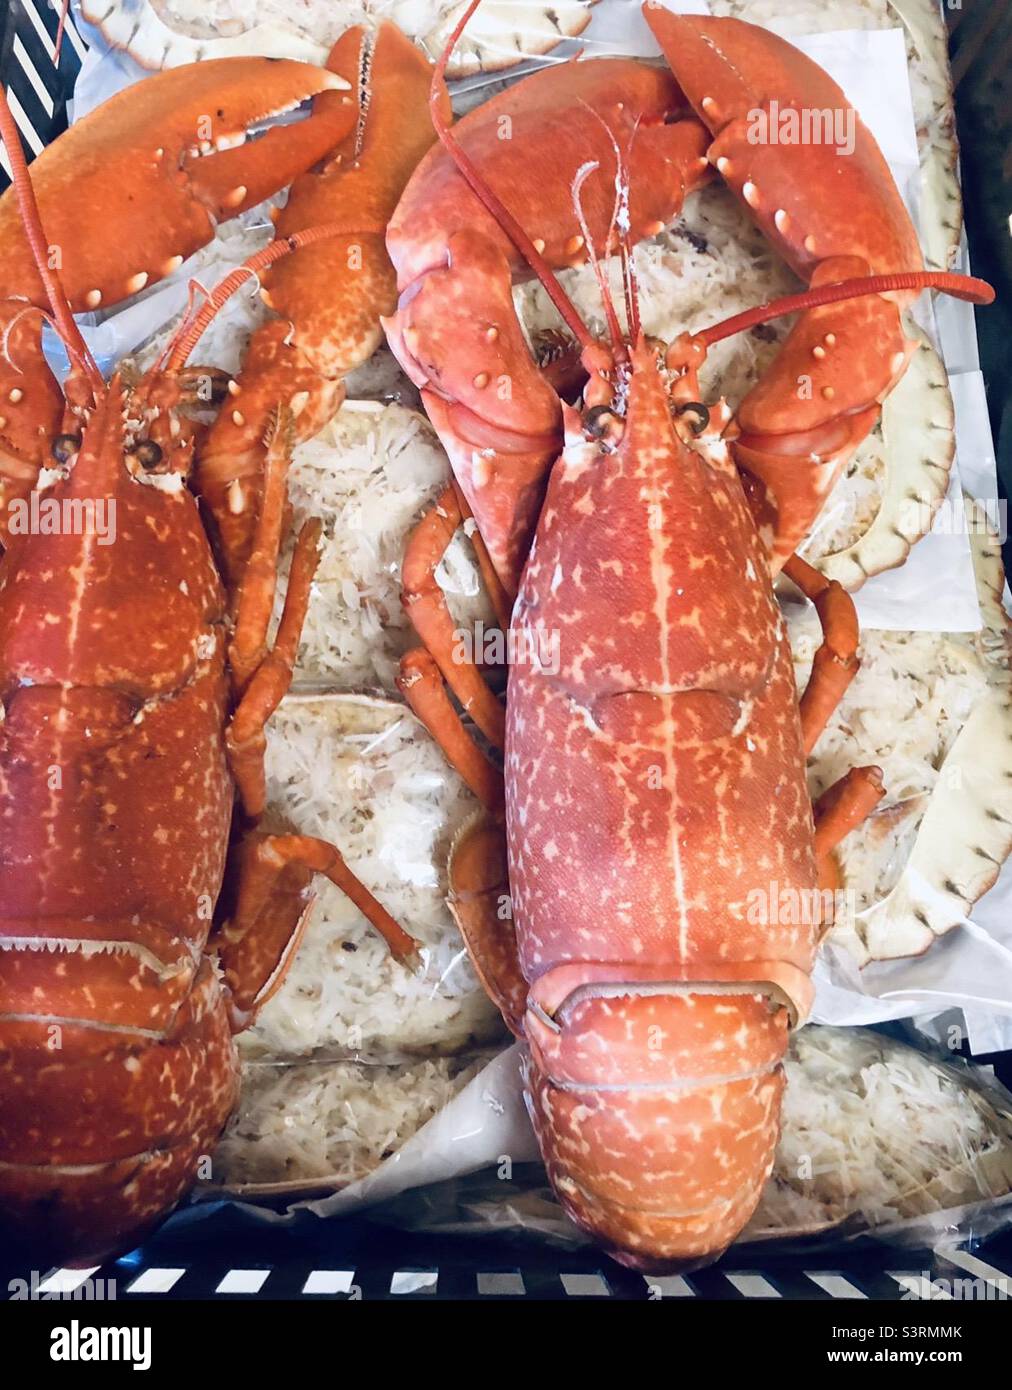 Cooked lobster and dressed crabs ready for market Stock Photo